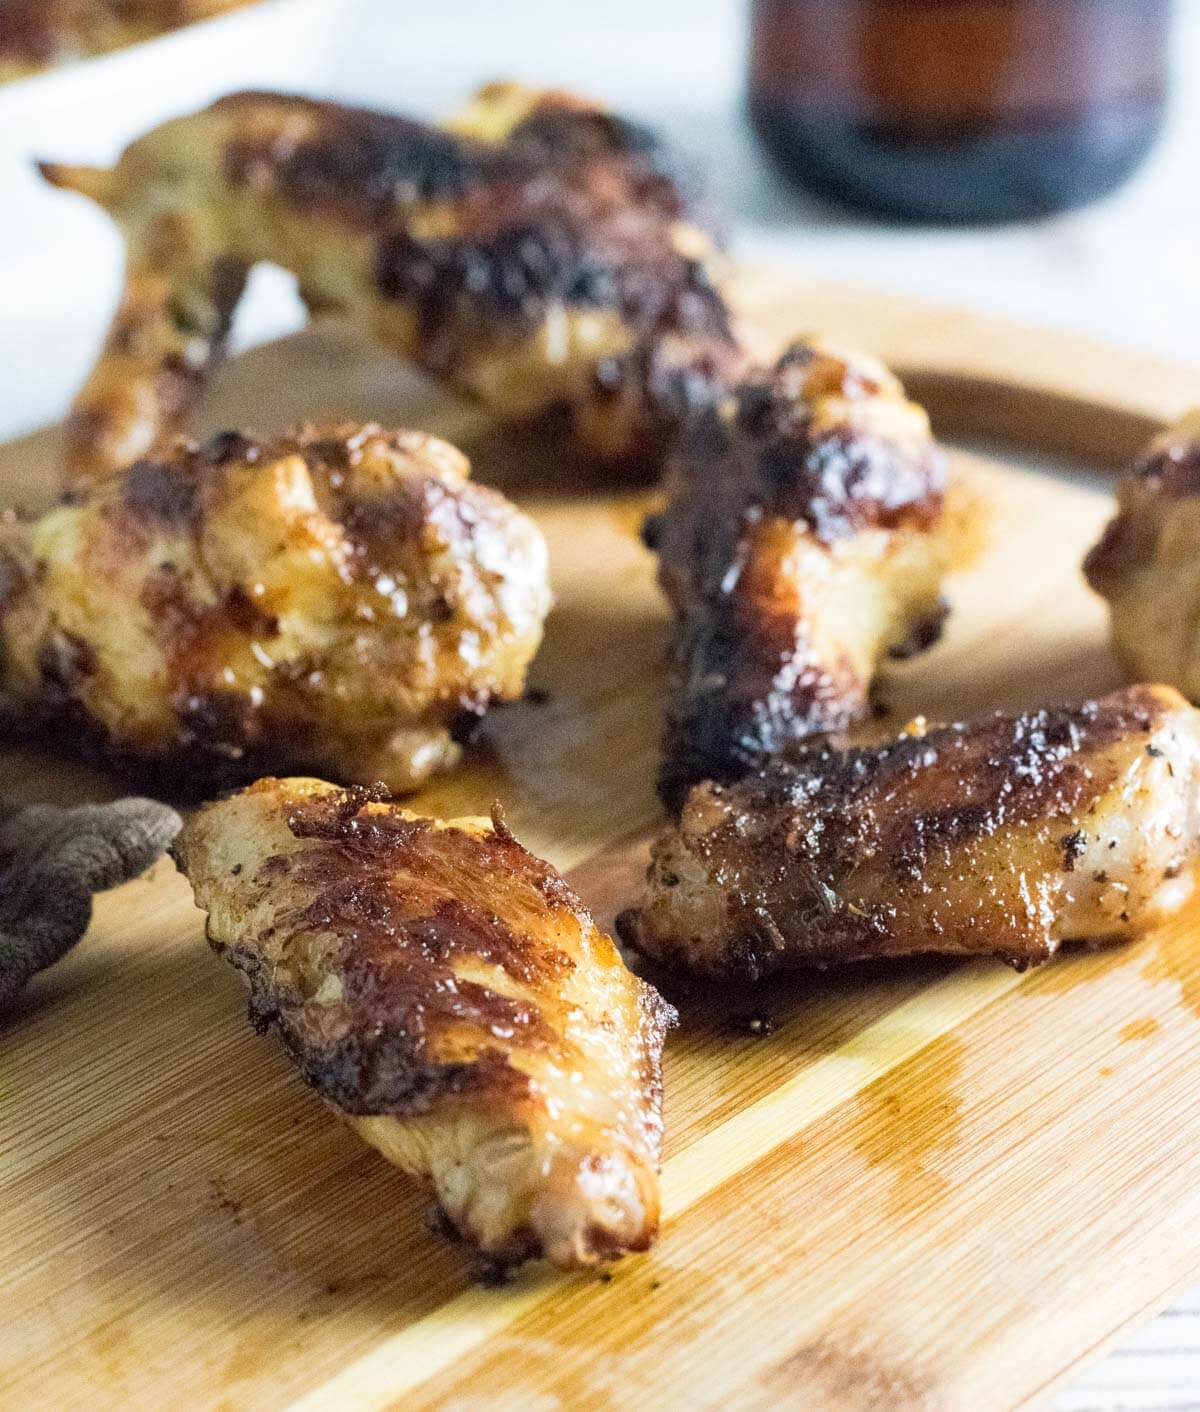 Brined chicken wings on cutting board.